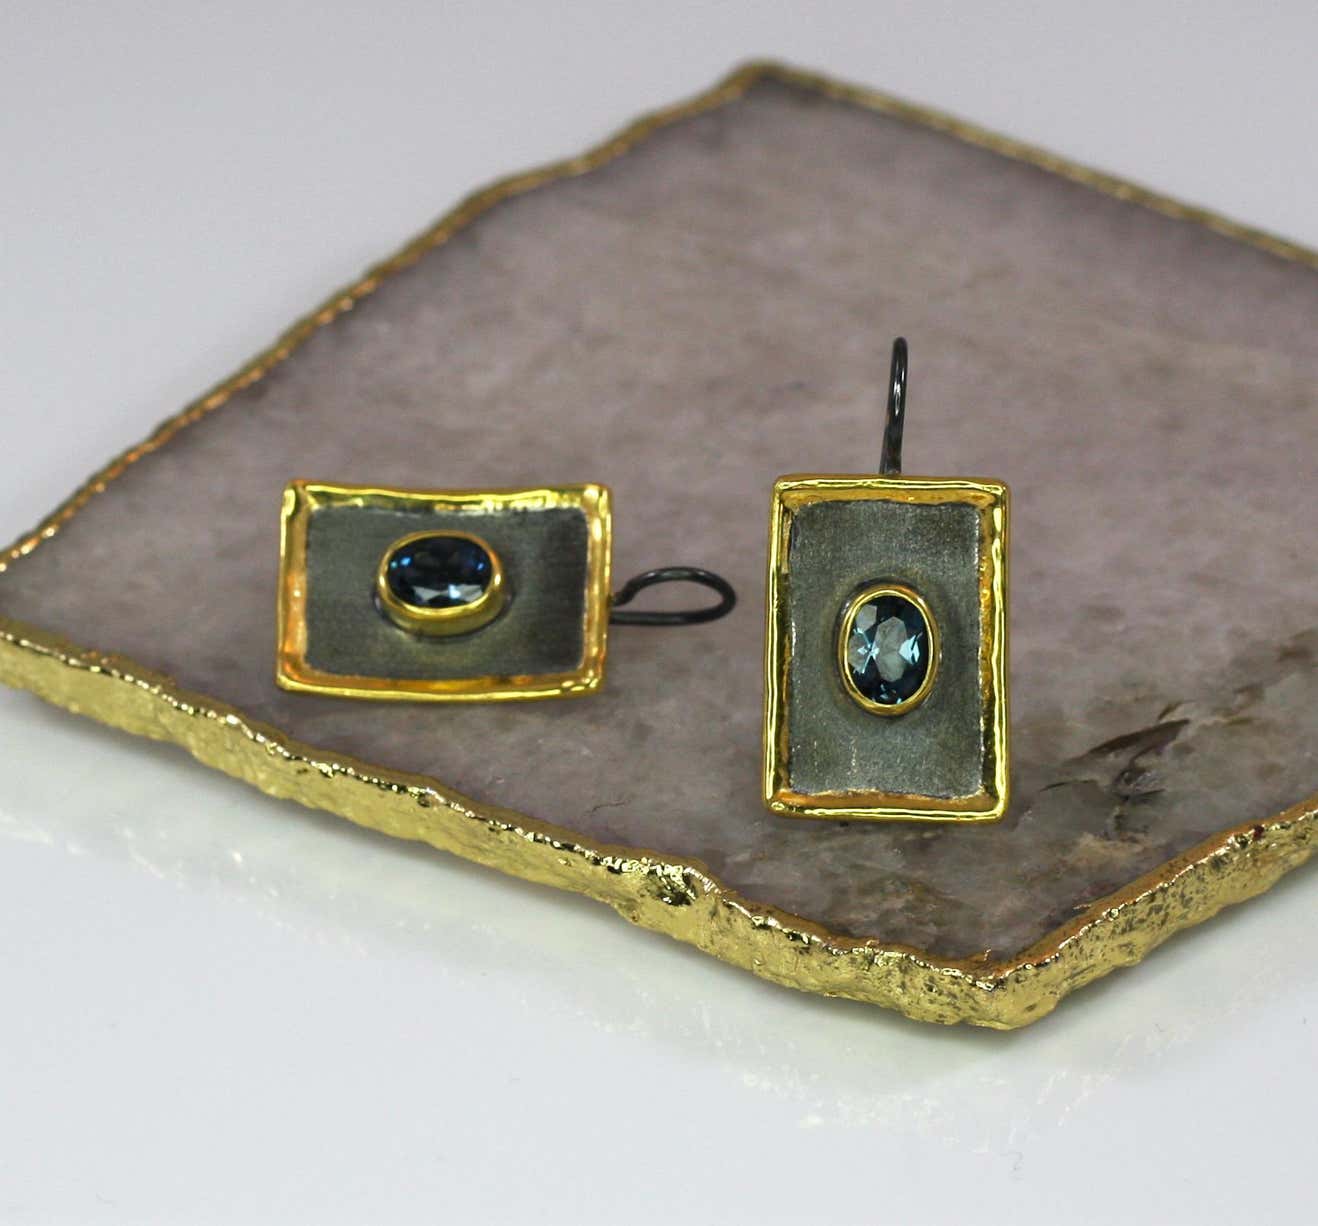 Eclyps Topaz Earrings in Fine Silver Finished with Ruthenium and Gold